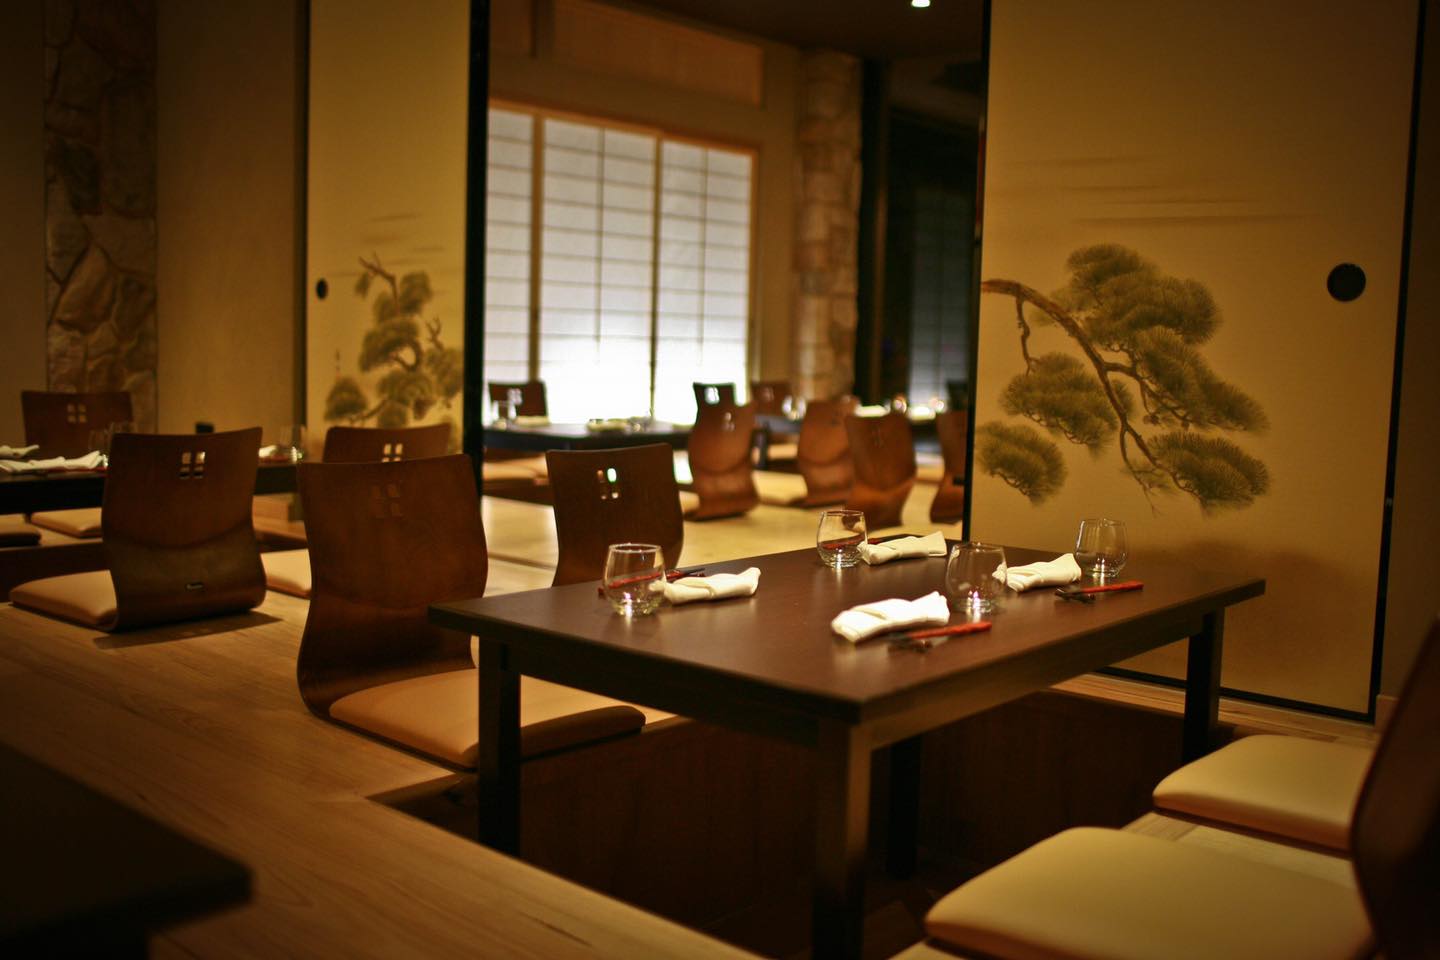 Shoes off and Japanese feasting on at Ginza Miyako